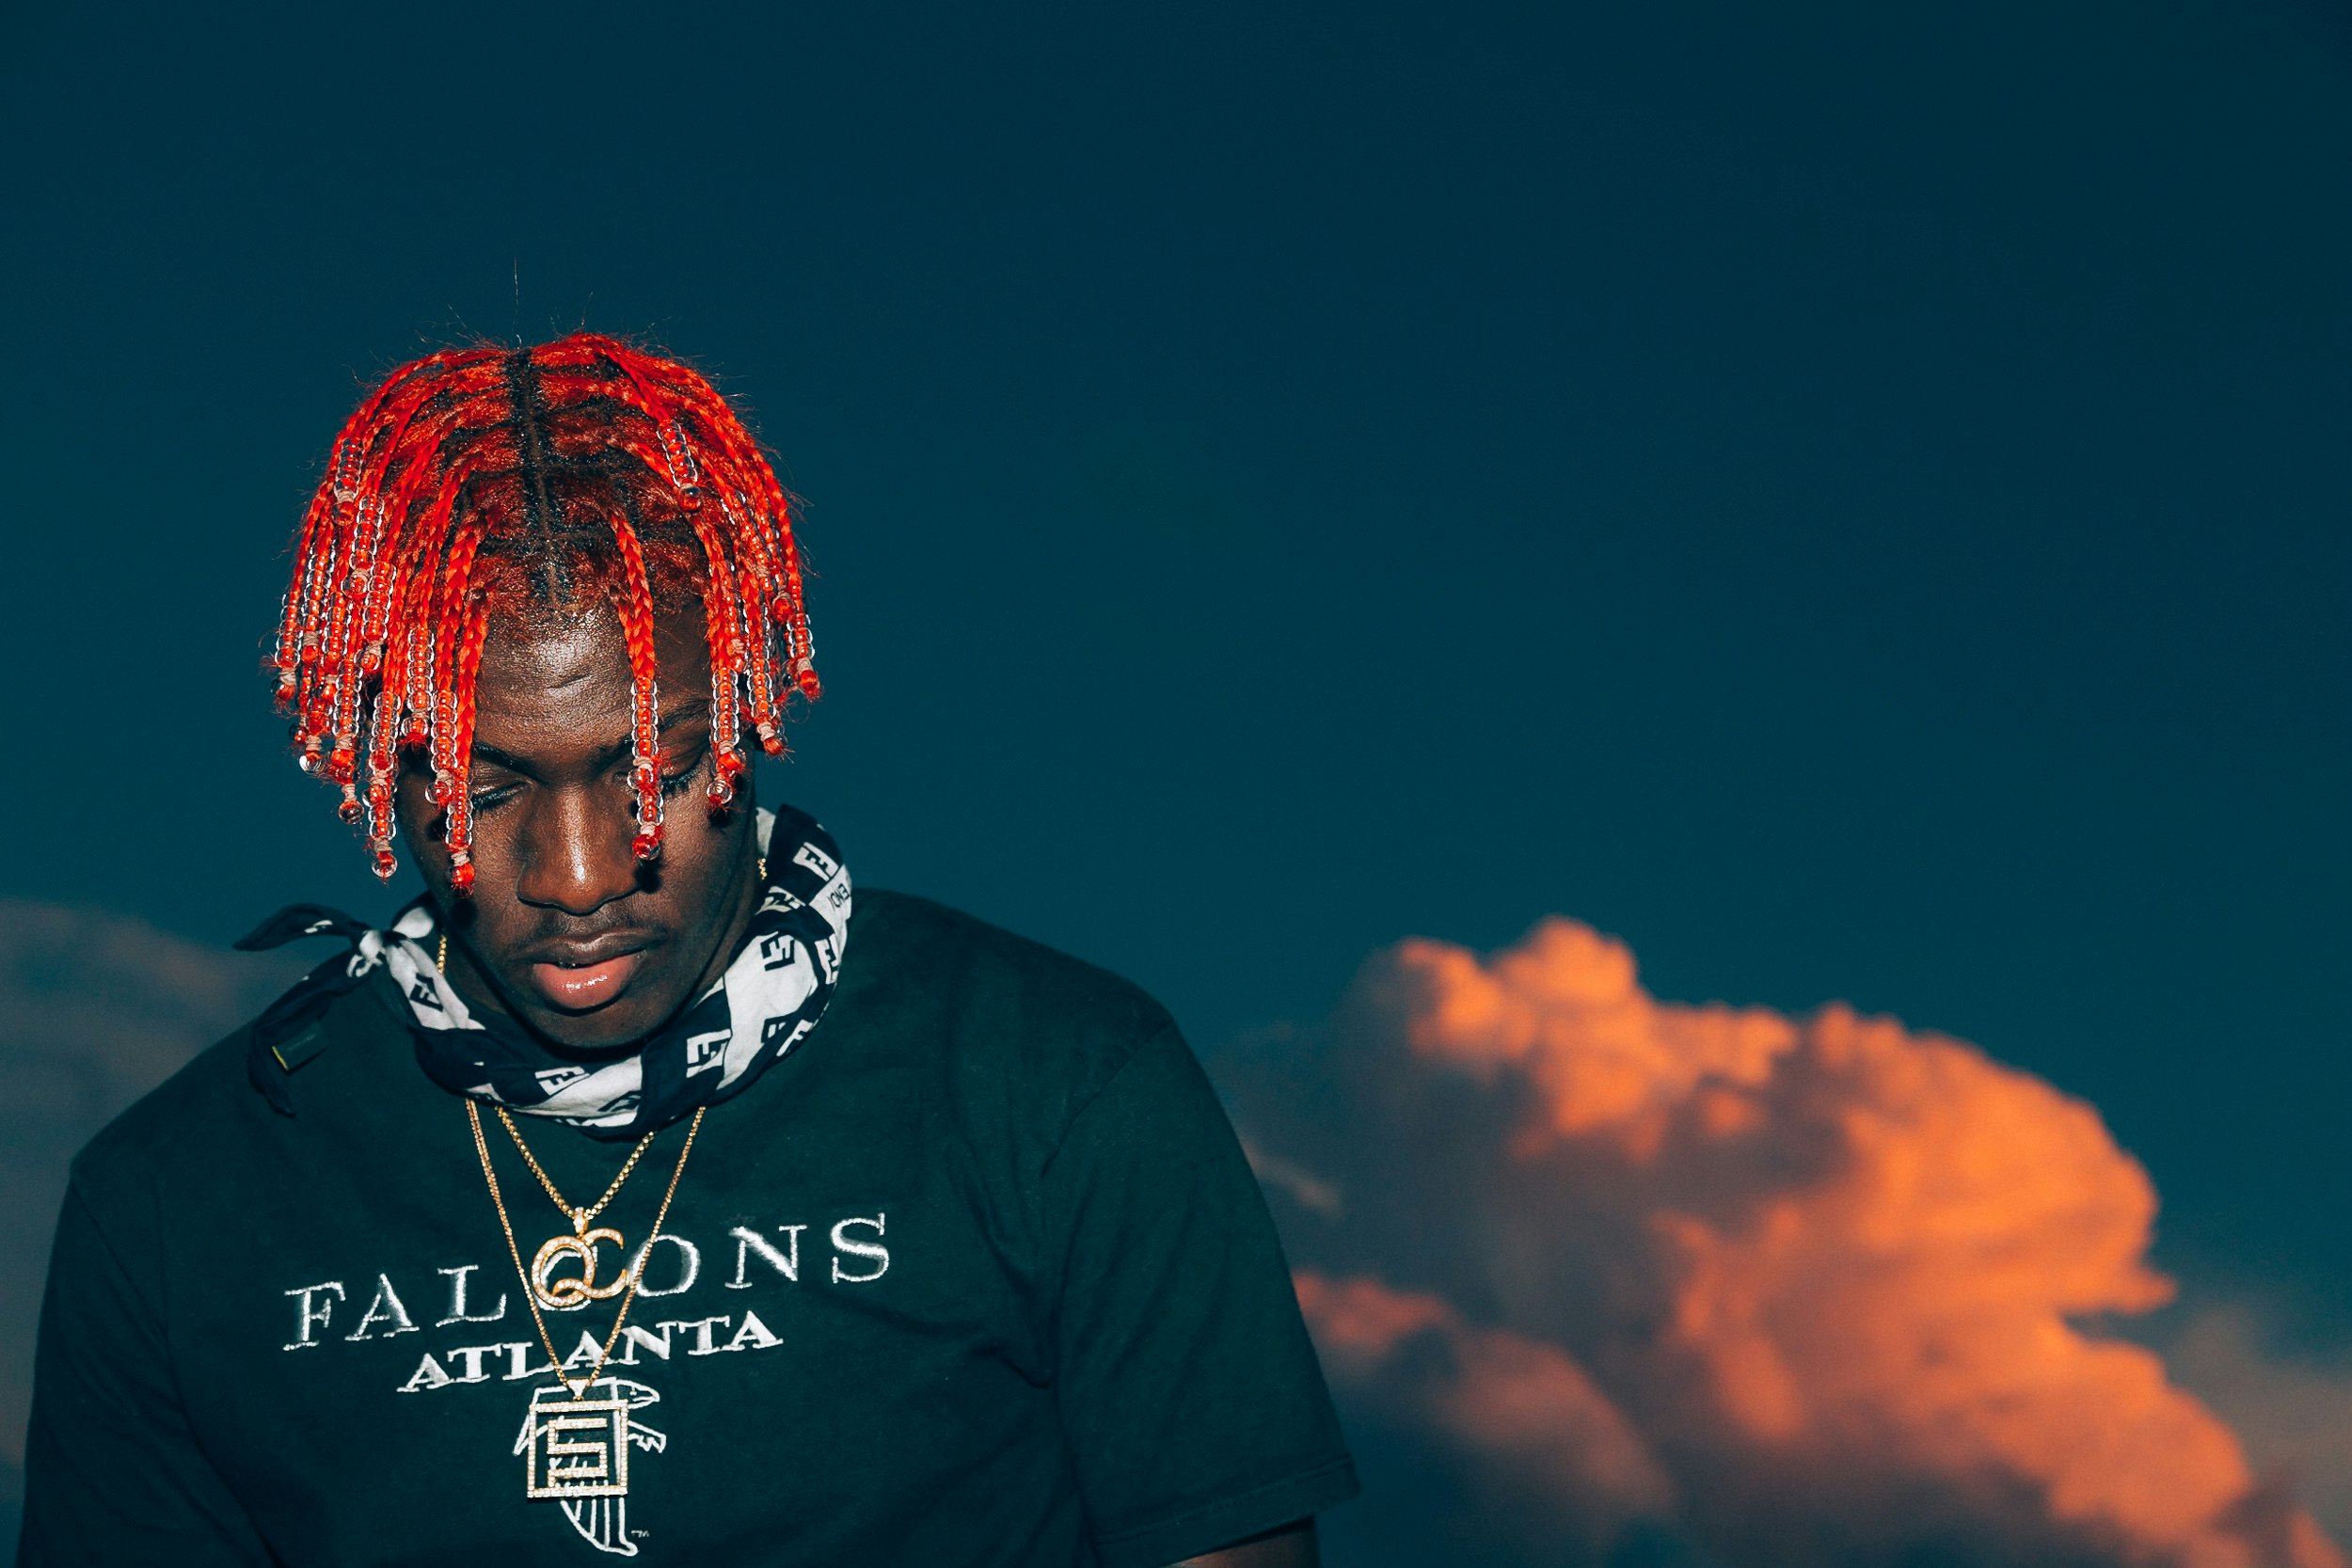 Download wallpapers Lil Yachty american singer Miles Parks McCollum red  stone background creative art for desktop free Pictures for desktop free